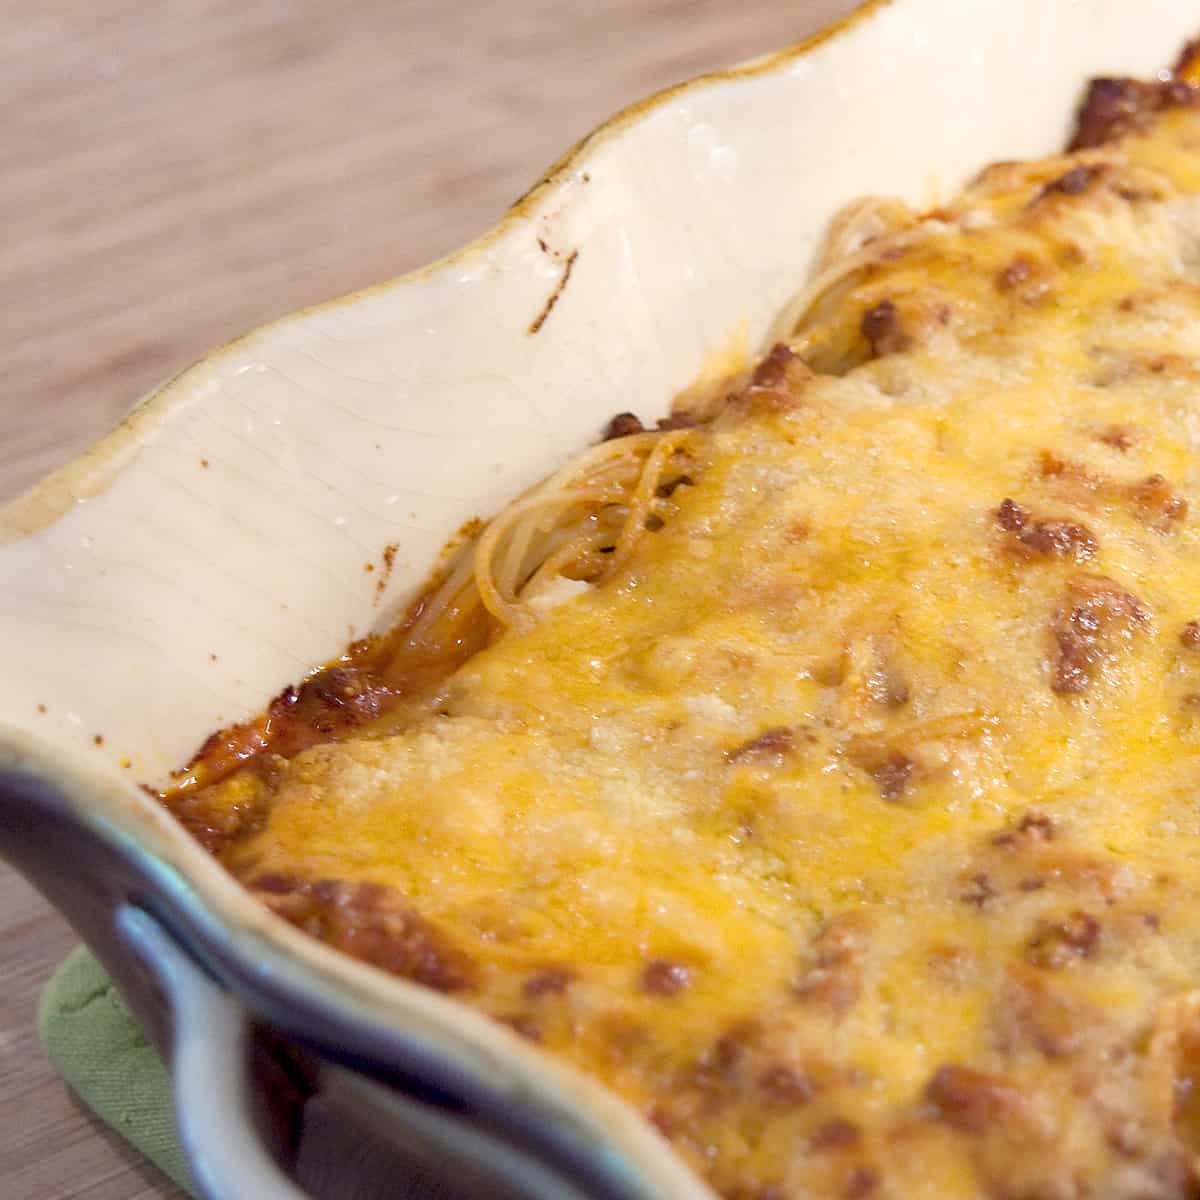 This baked spaghetti contains layers of meat sauce, spaghetti, and cheese baked until bubbly. Very kid-friendly and quick and easy for the cook. https://www.lanascooking.com/baked-spaghetti/